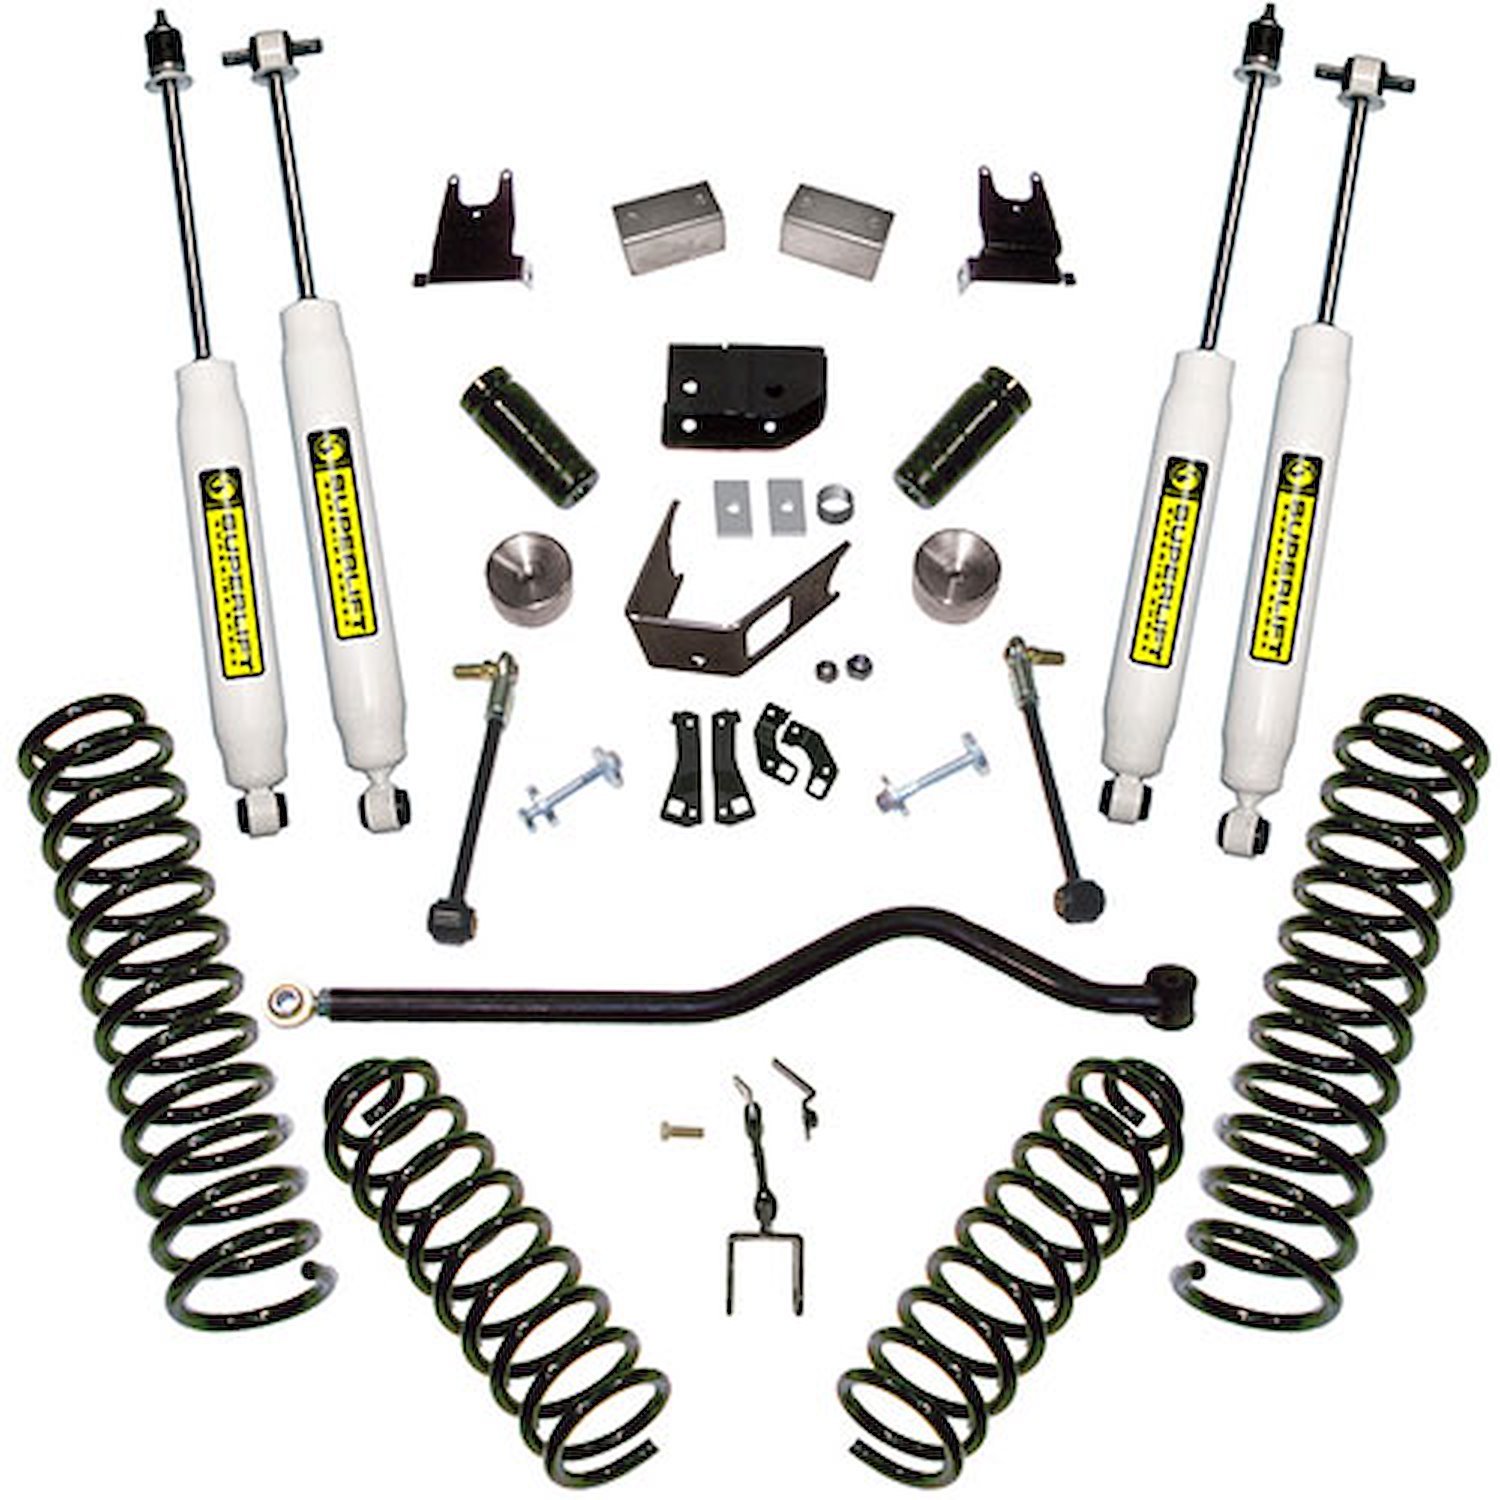 K928 Front and Rear Suspension Lift Kit, Lift